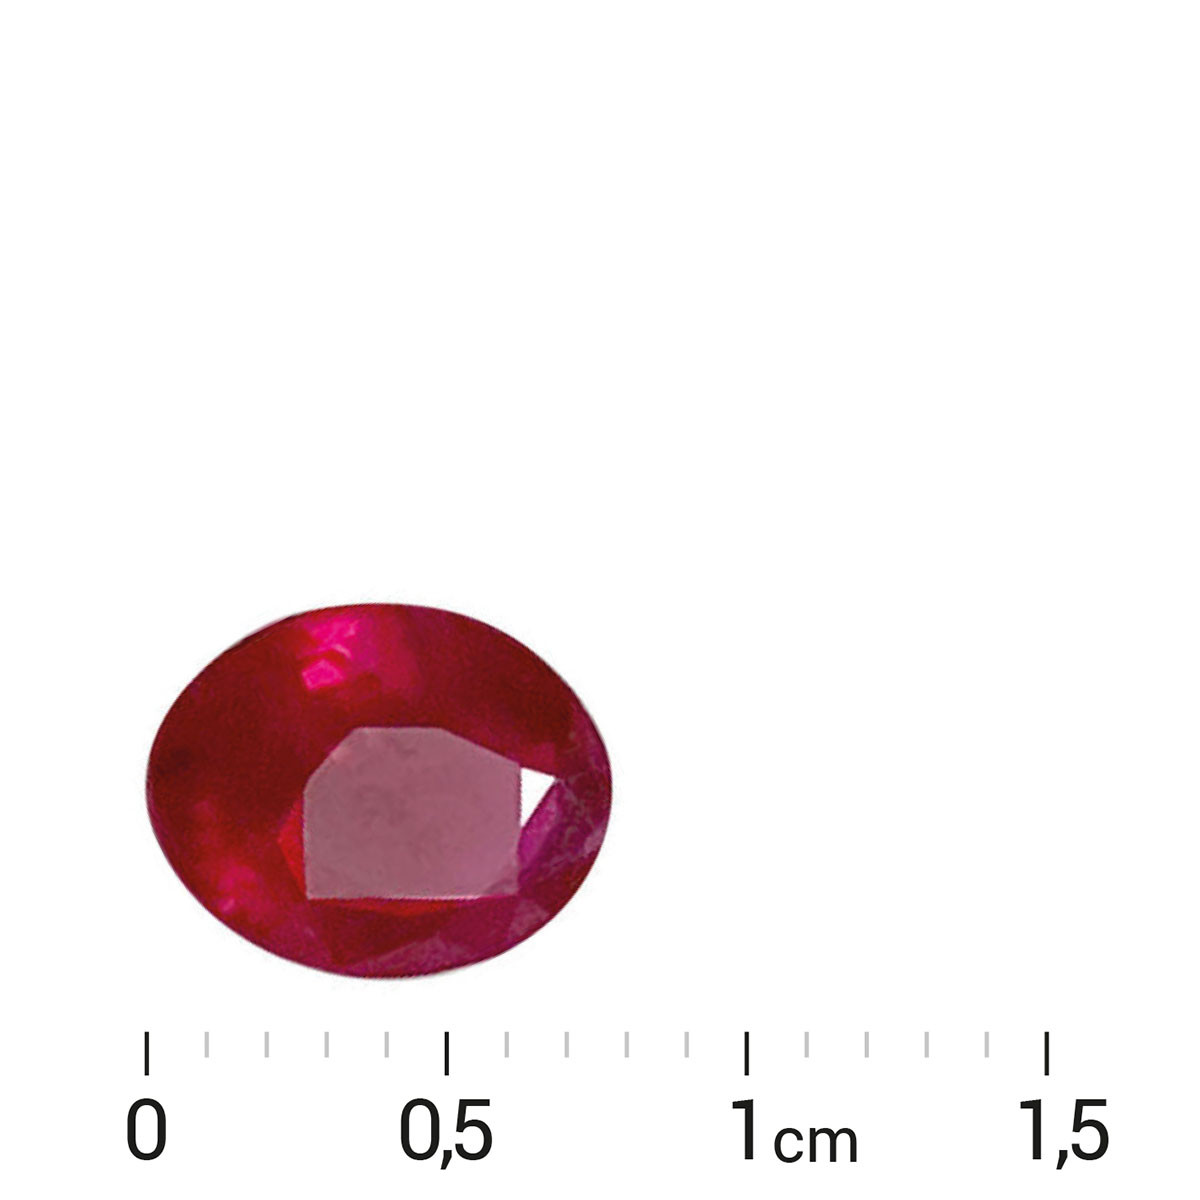 RUBIS rouge, forme ovale, 1.27 ct. - vue D1